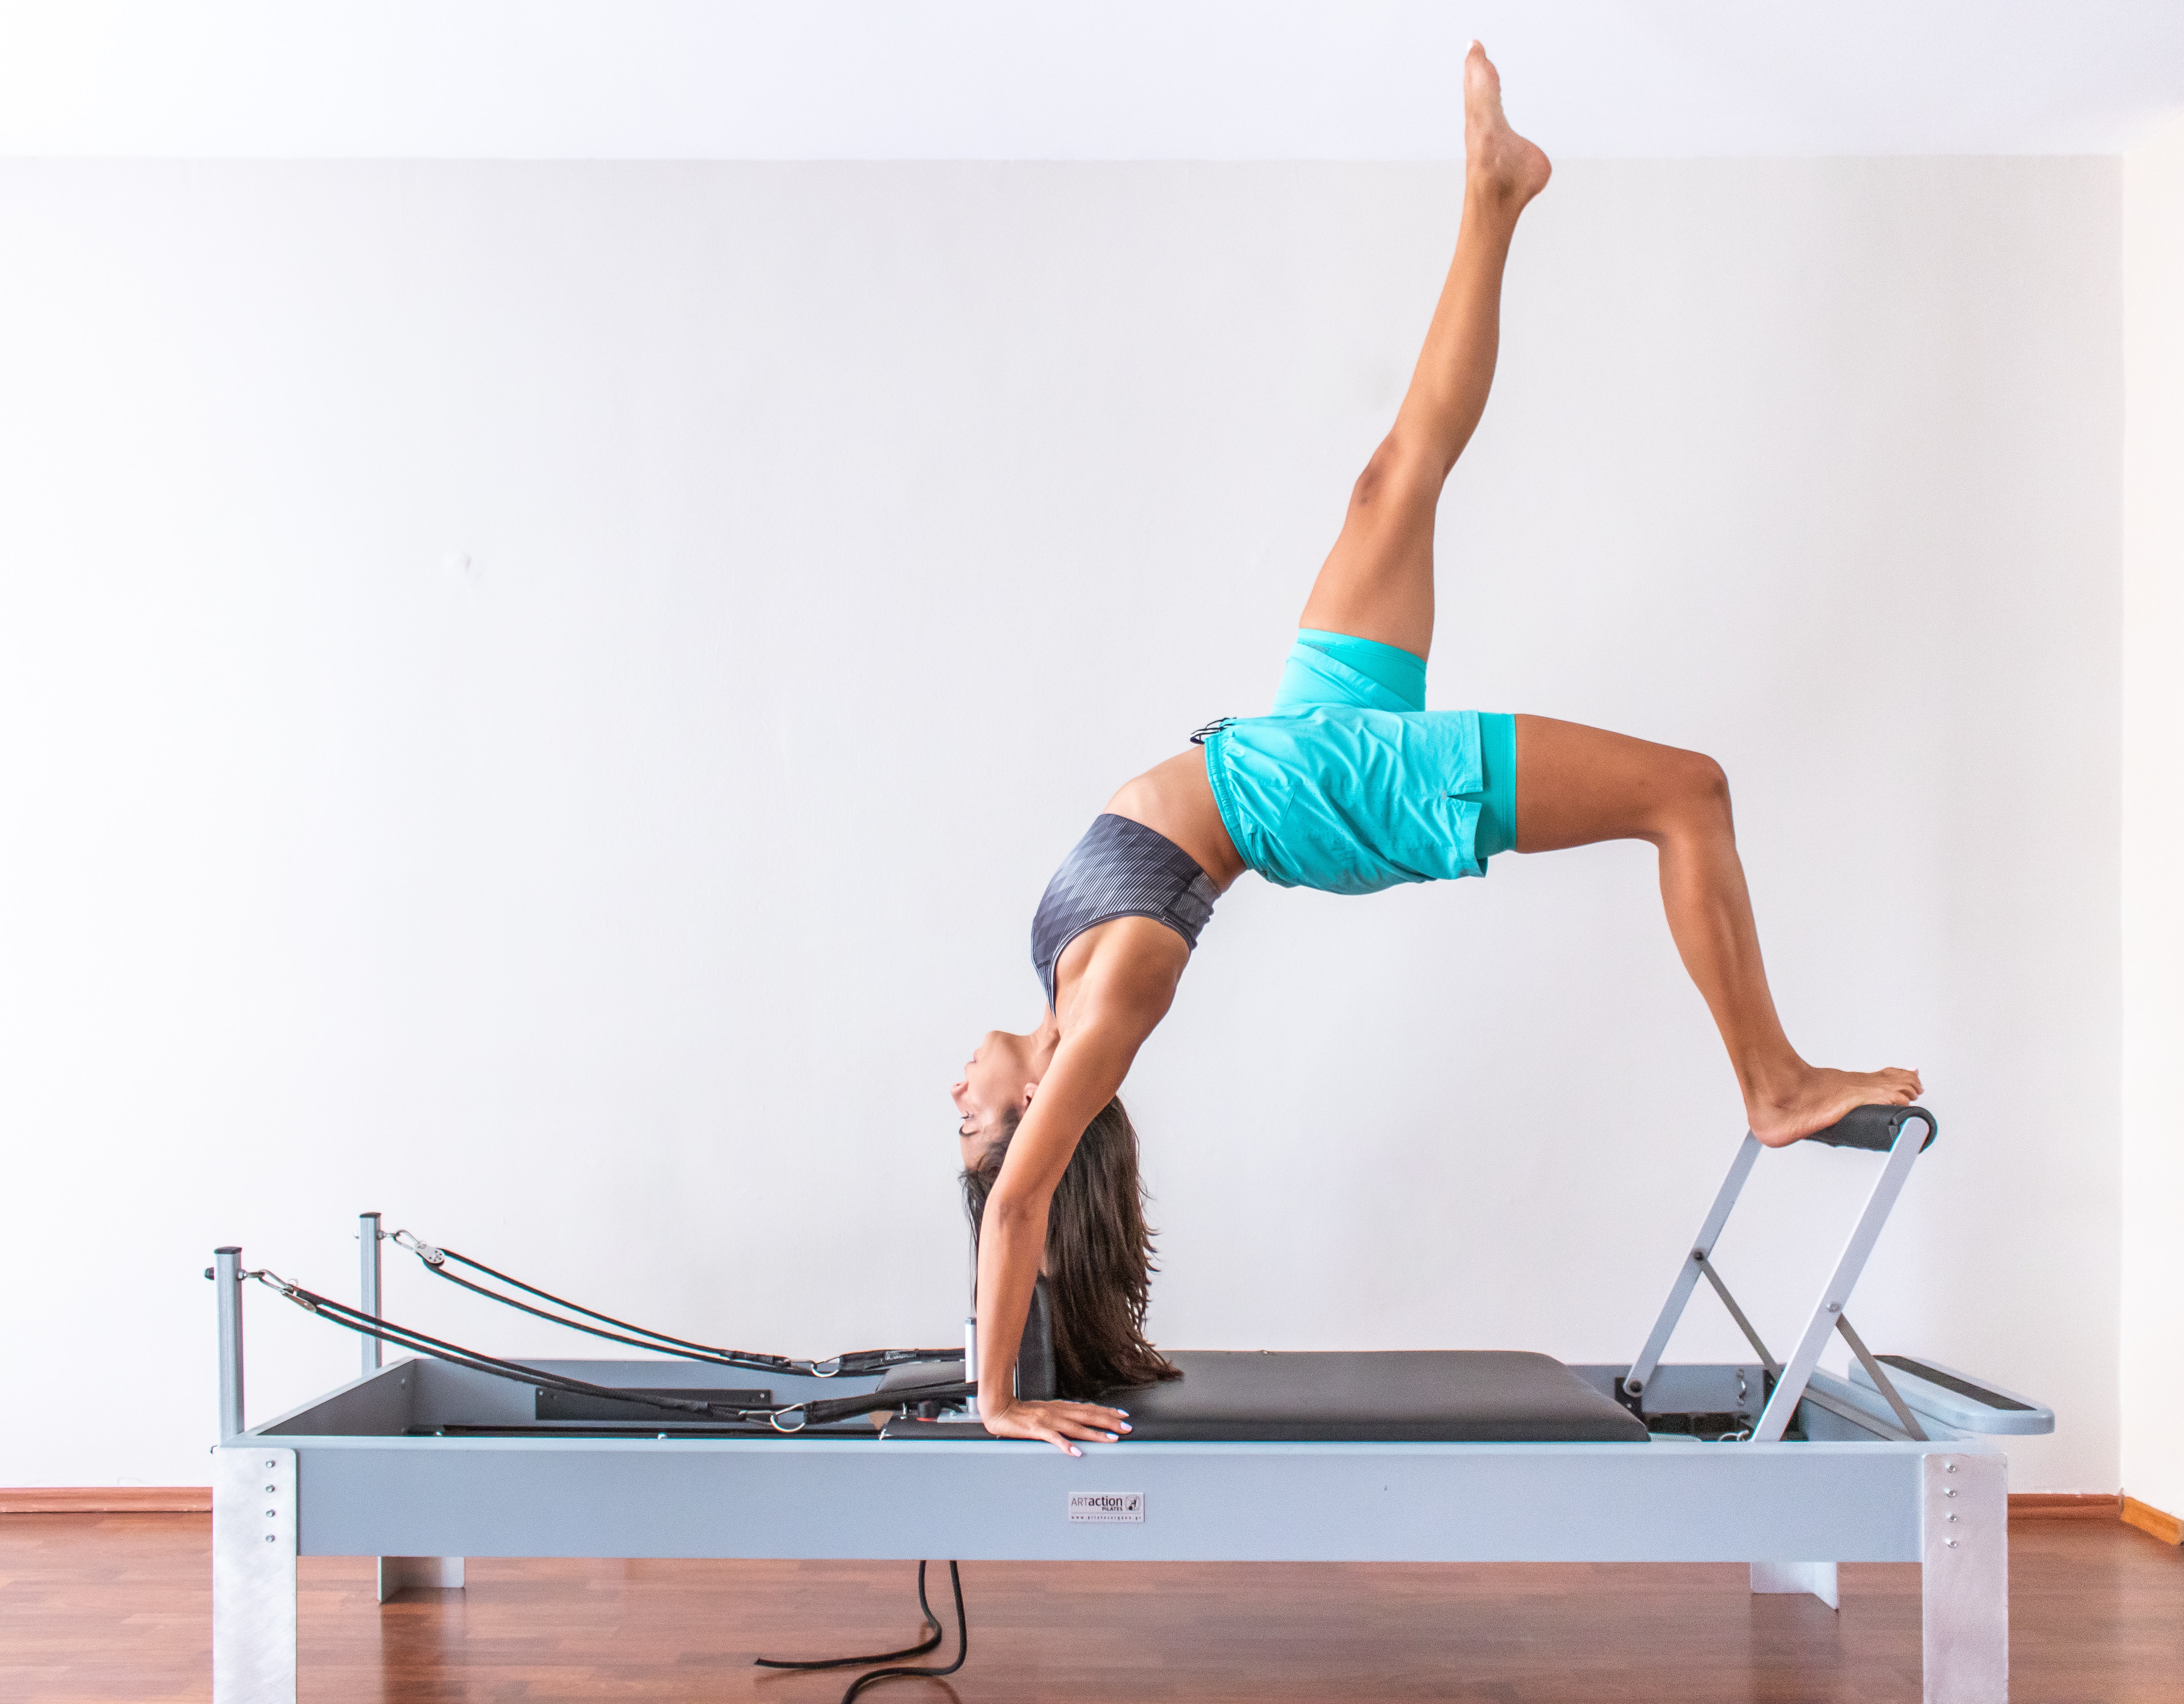 young woman performing stretches on an elevated exercise frame